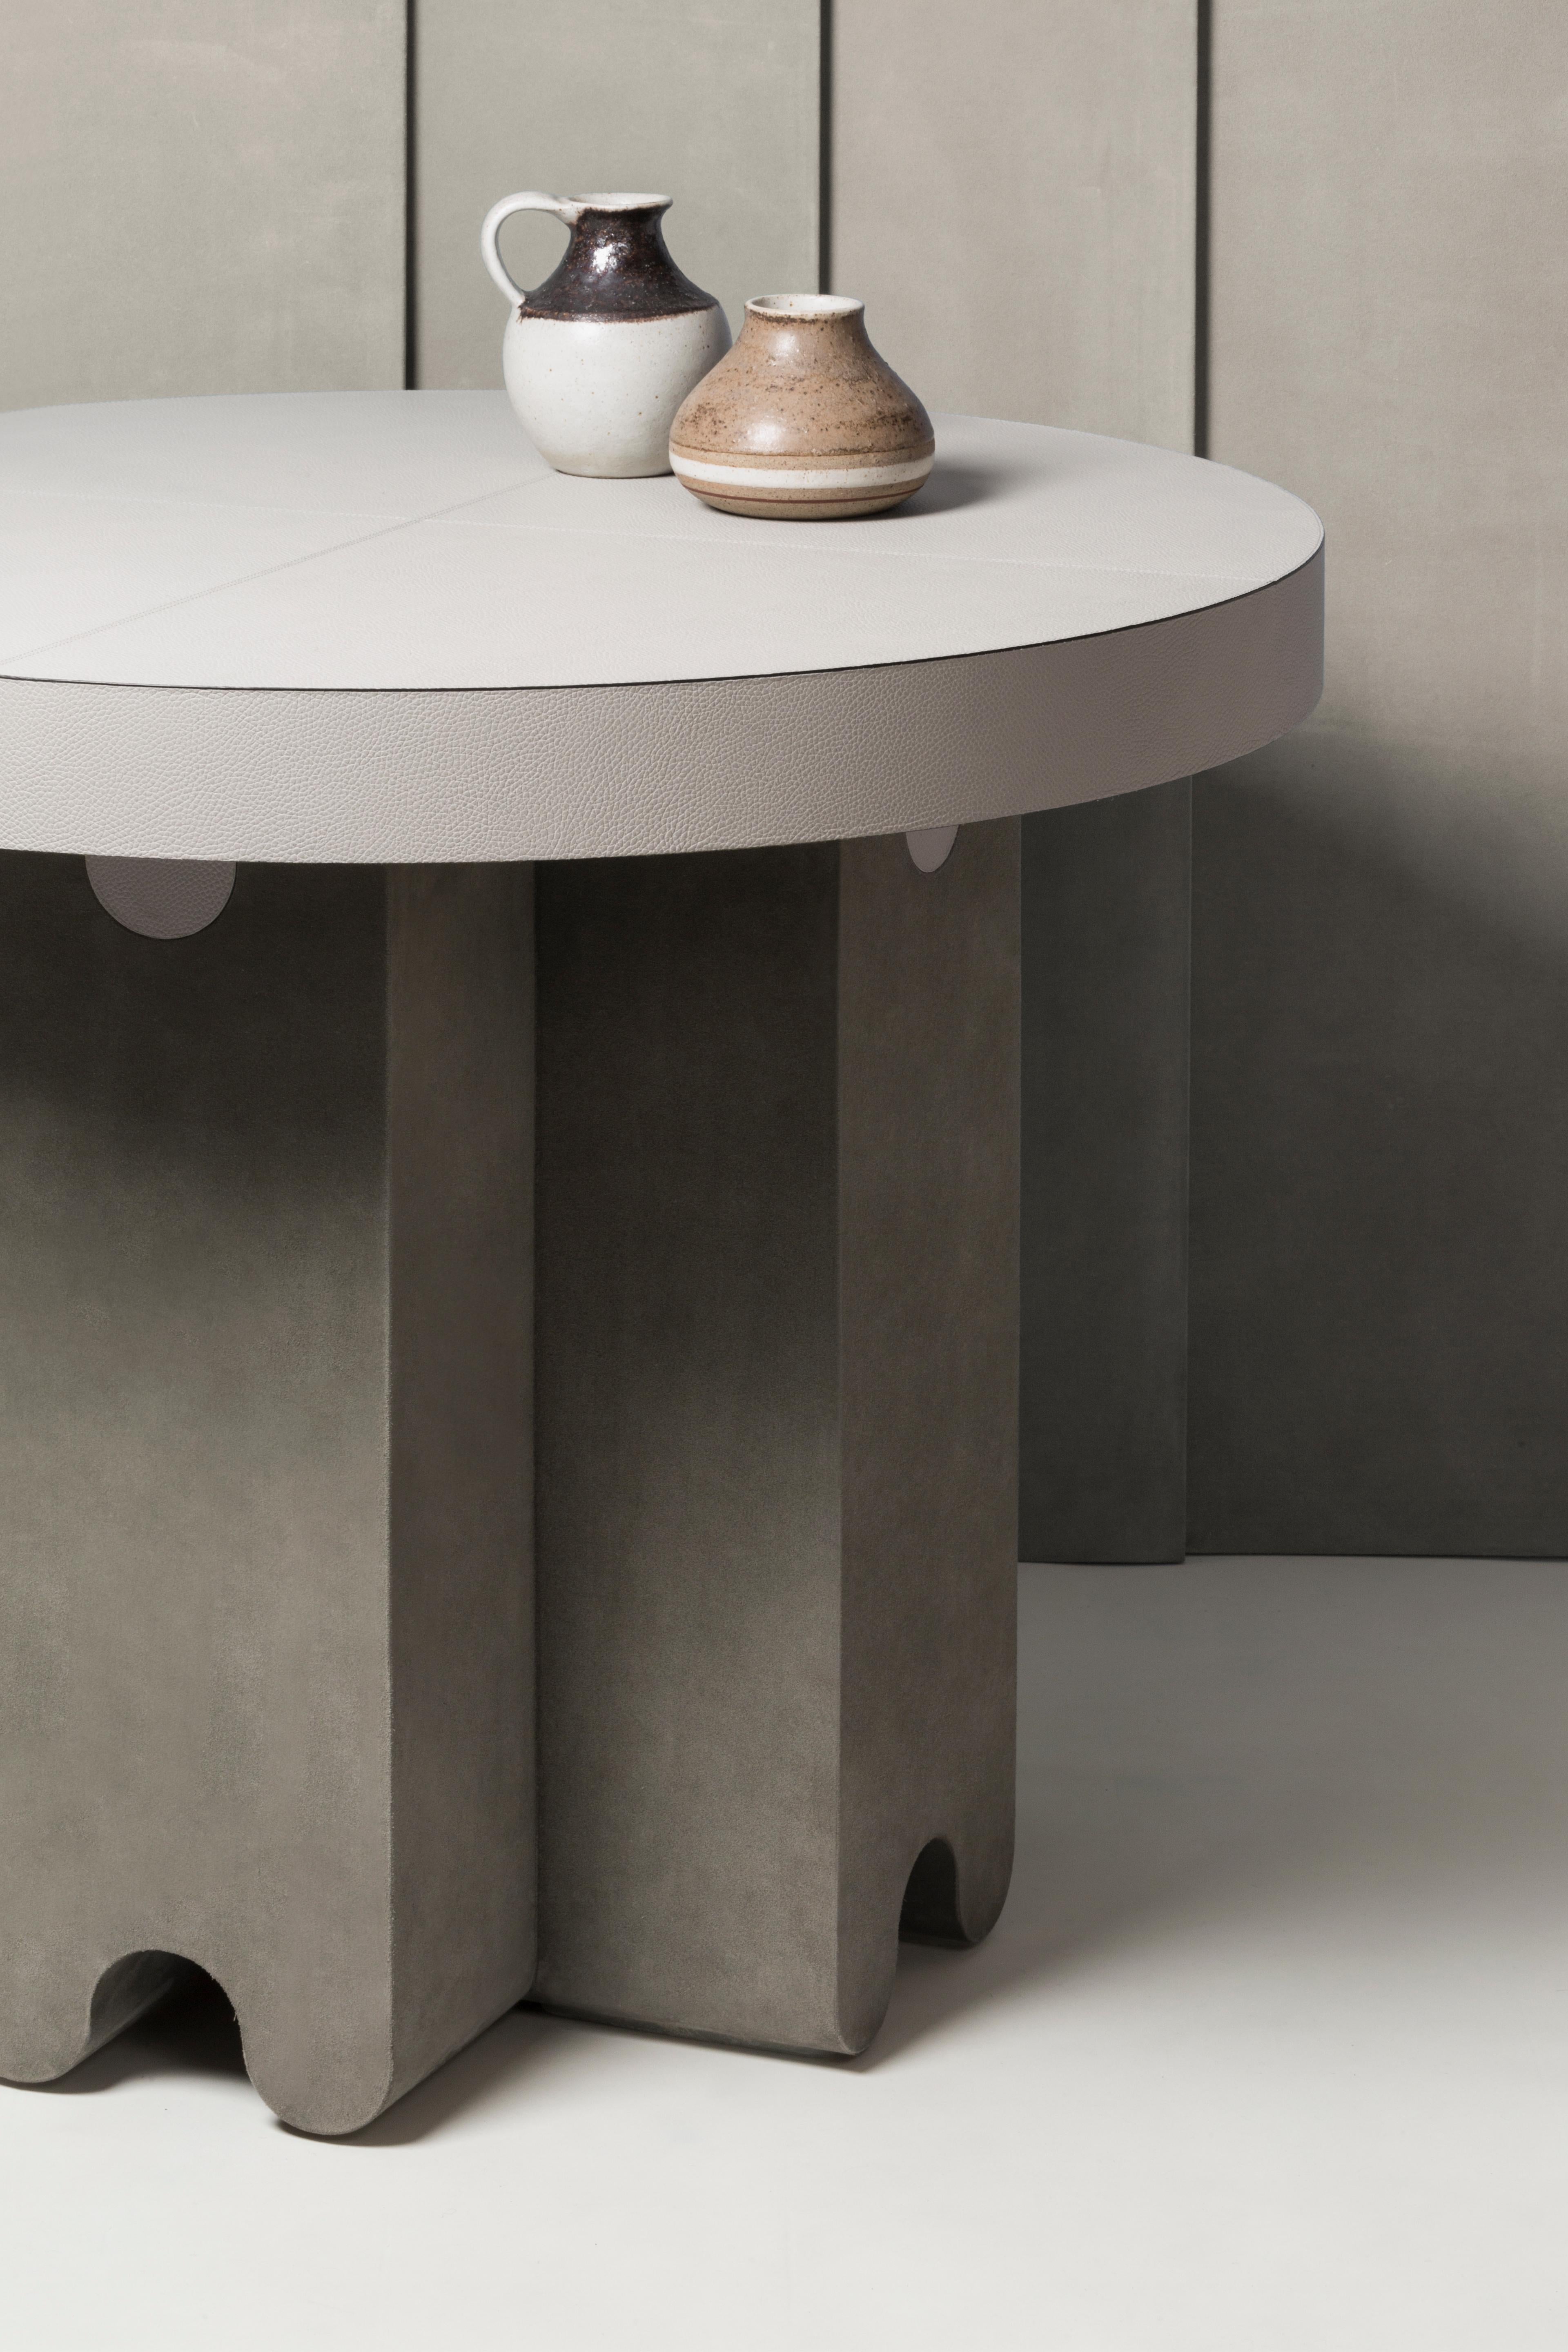 Ossicle Leather Round Table -- Francesco Balzano x Giobagnara

Top available only in printed calfskin, suede, nappa finish; legs available only in suede. Pictured here is the table with H37 Light Grey printed calfskin deer top and A69 Sage suede